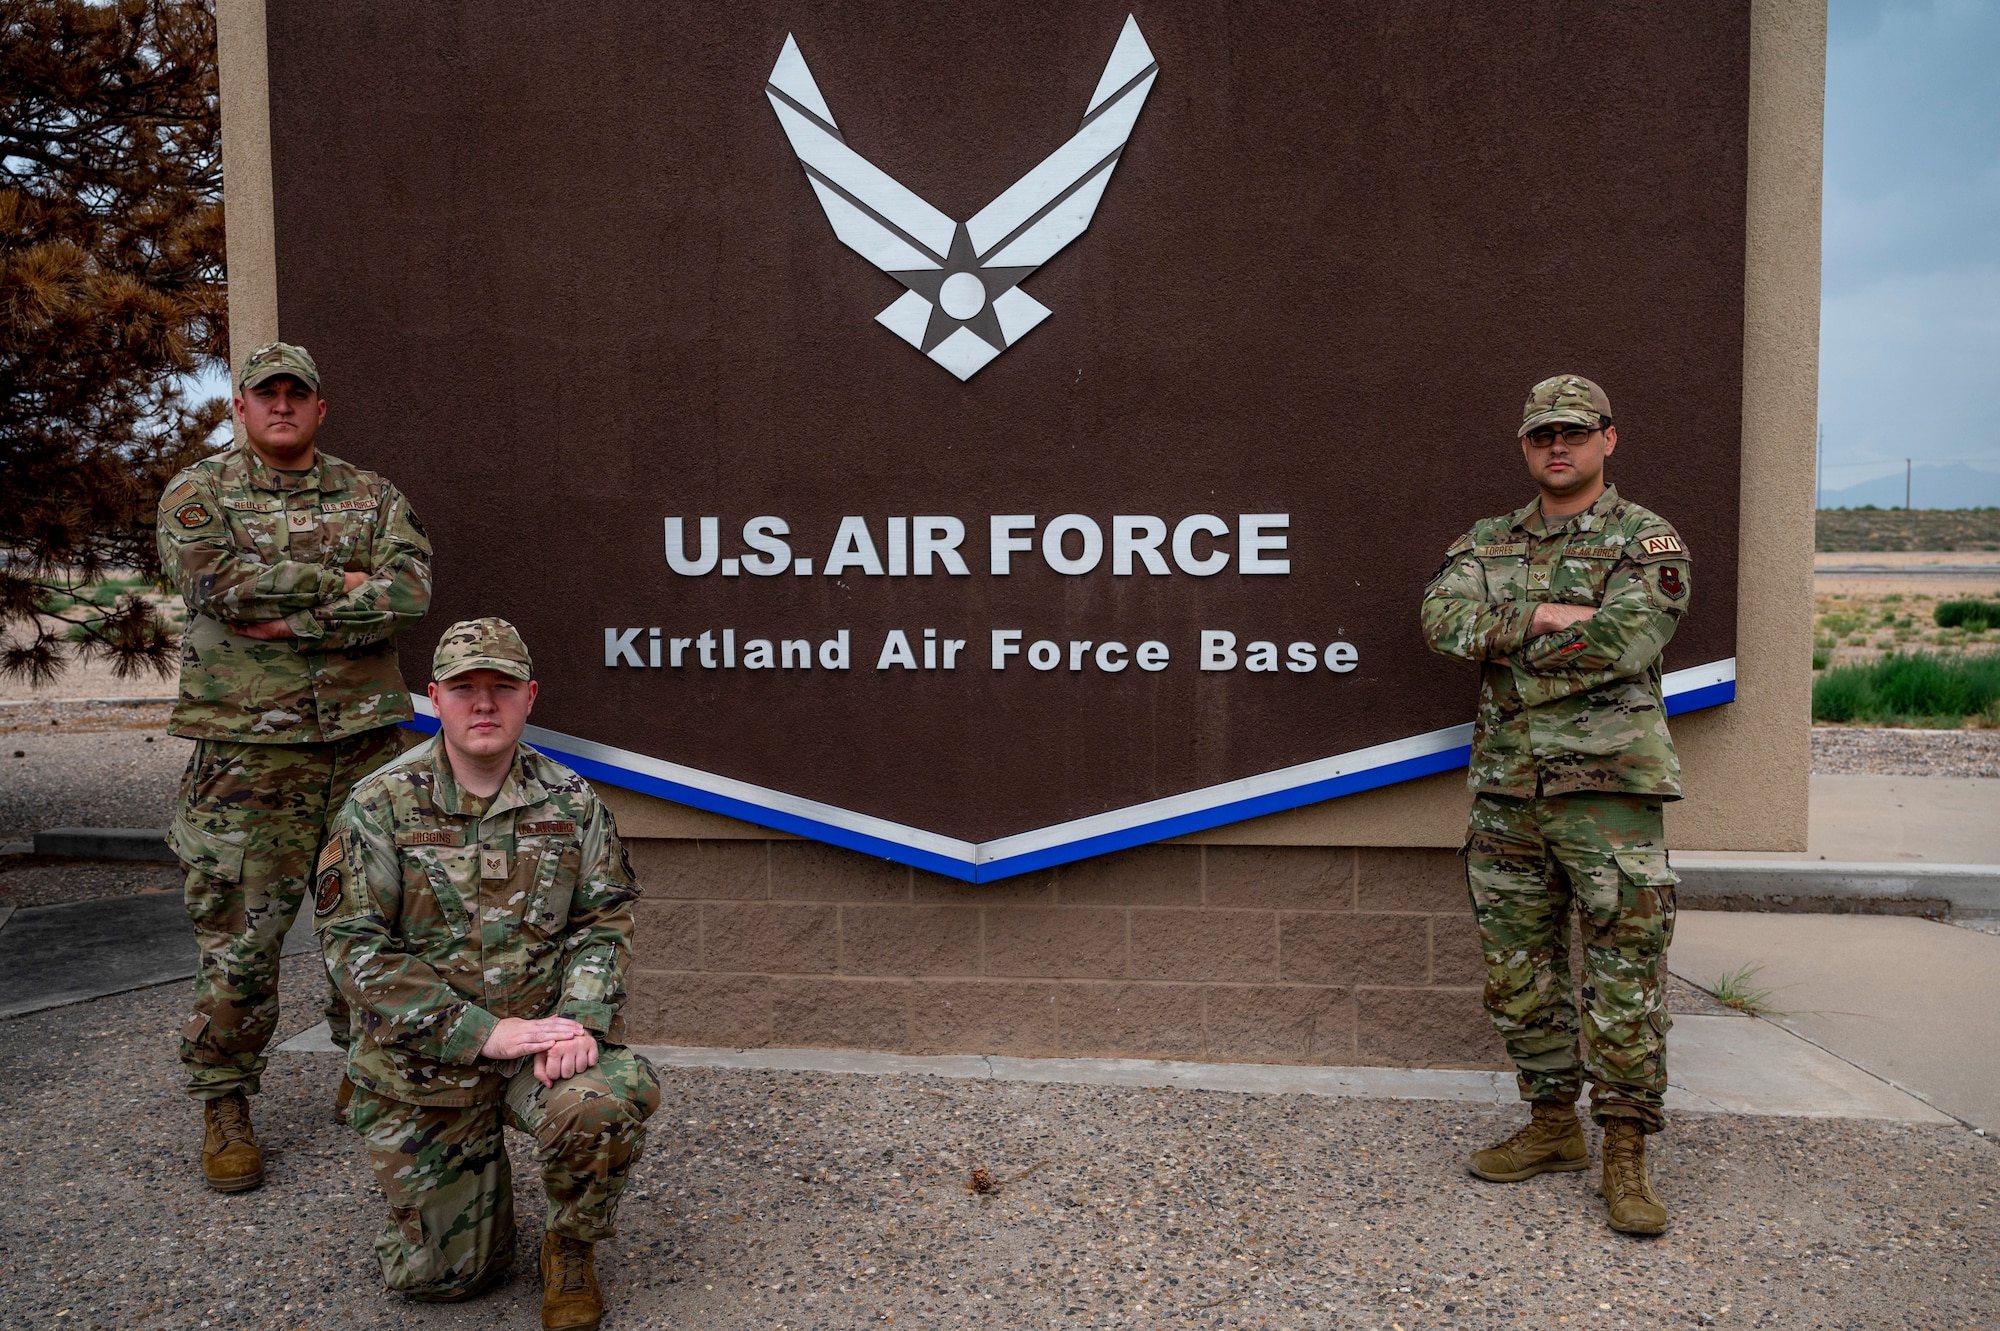 Group poses in front of Kirtland AFB sign